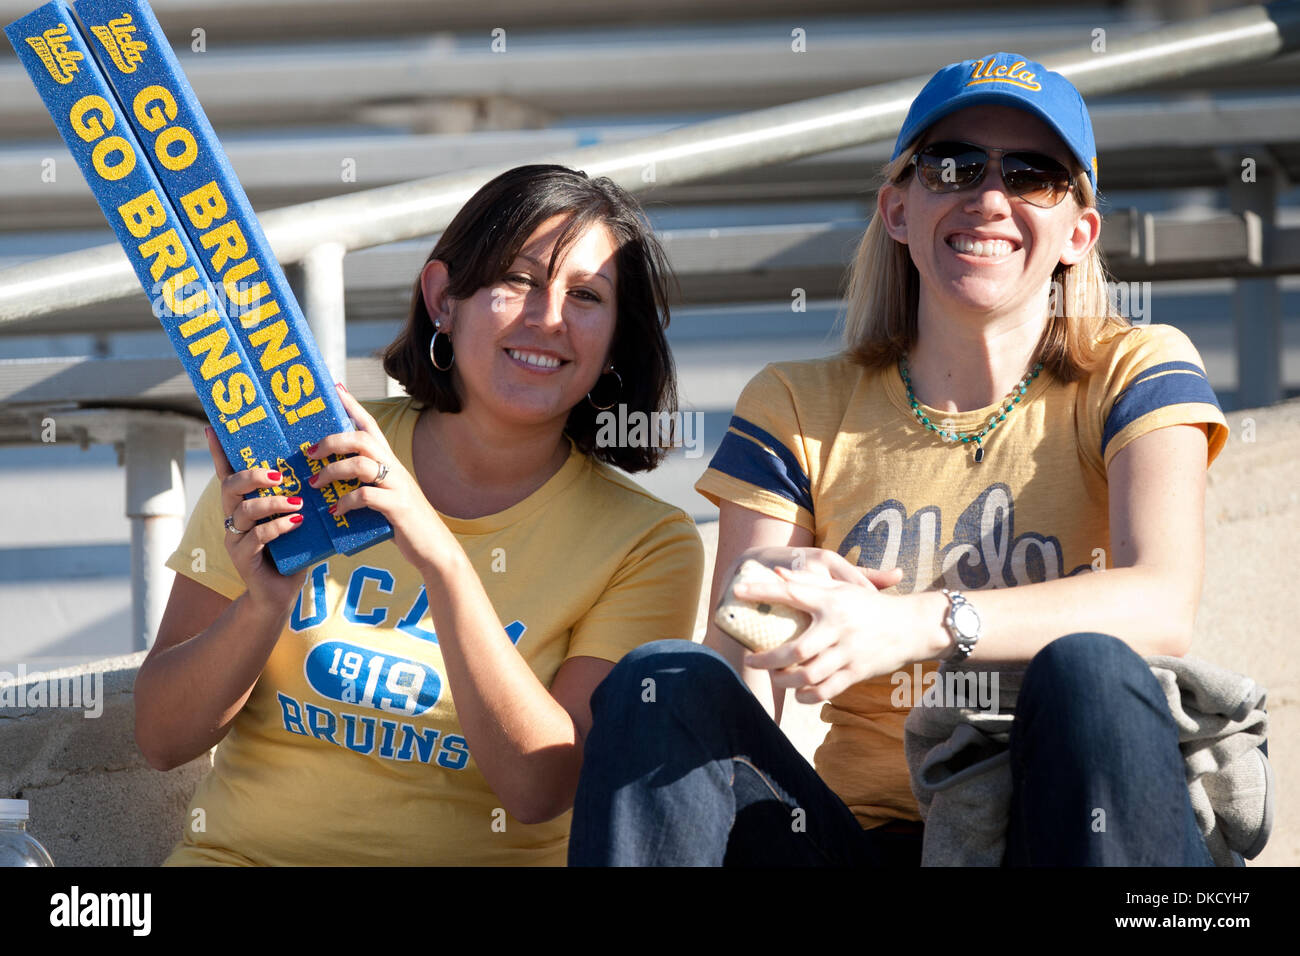 Oct. 29, 2011 - Pasadena, California, U.S - UCLA fans prior to the start of the NCAA Football game between the California Golden Bears and the UCLA Bruins at the Rose Bowl. (Credit Image: © Brandon Parry/Southcreek/ZUMAPRESS.com) Stock Photo